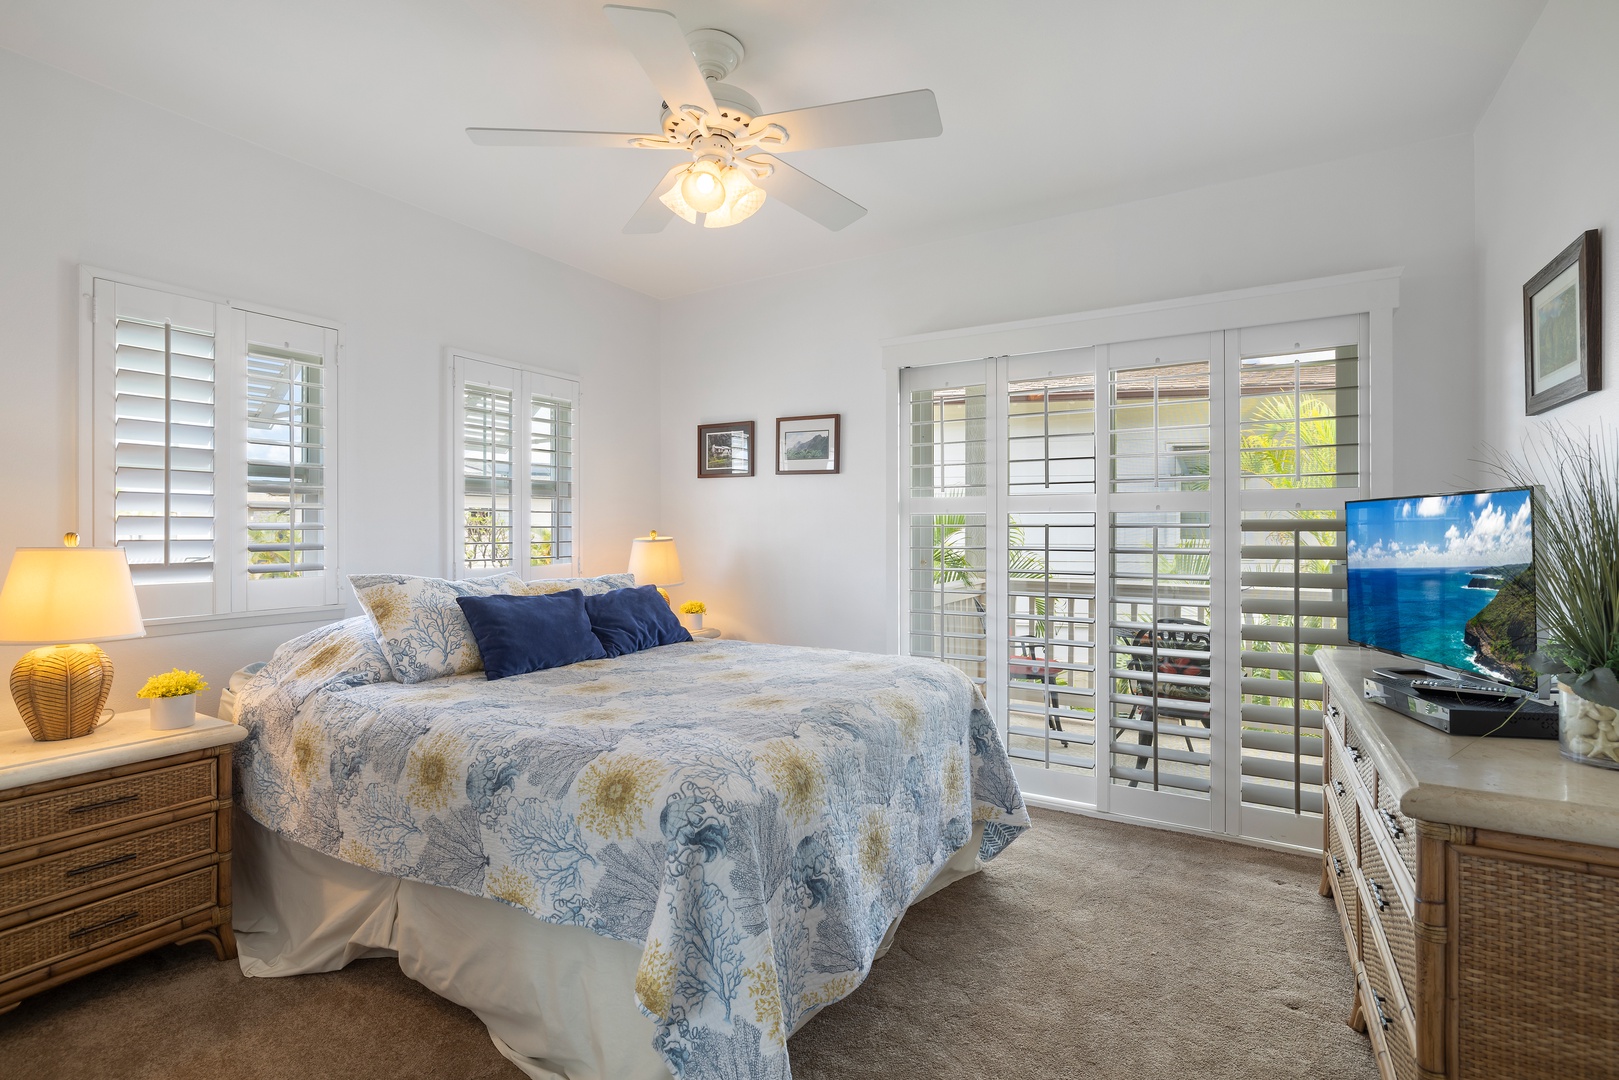 Kapolei Vacation Rentals, Coconut Plantation 1190-1 - The second guest bedroom with windows to the tropical scenery and a dresser.